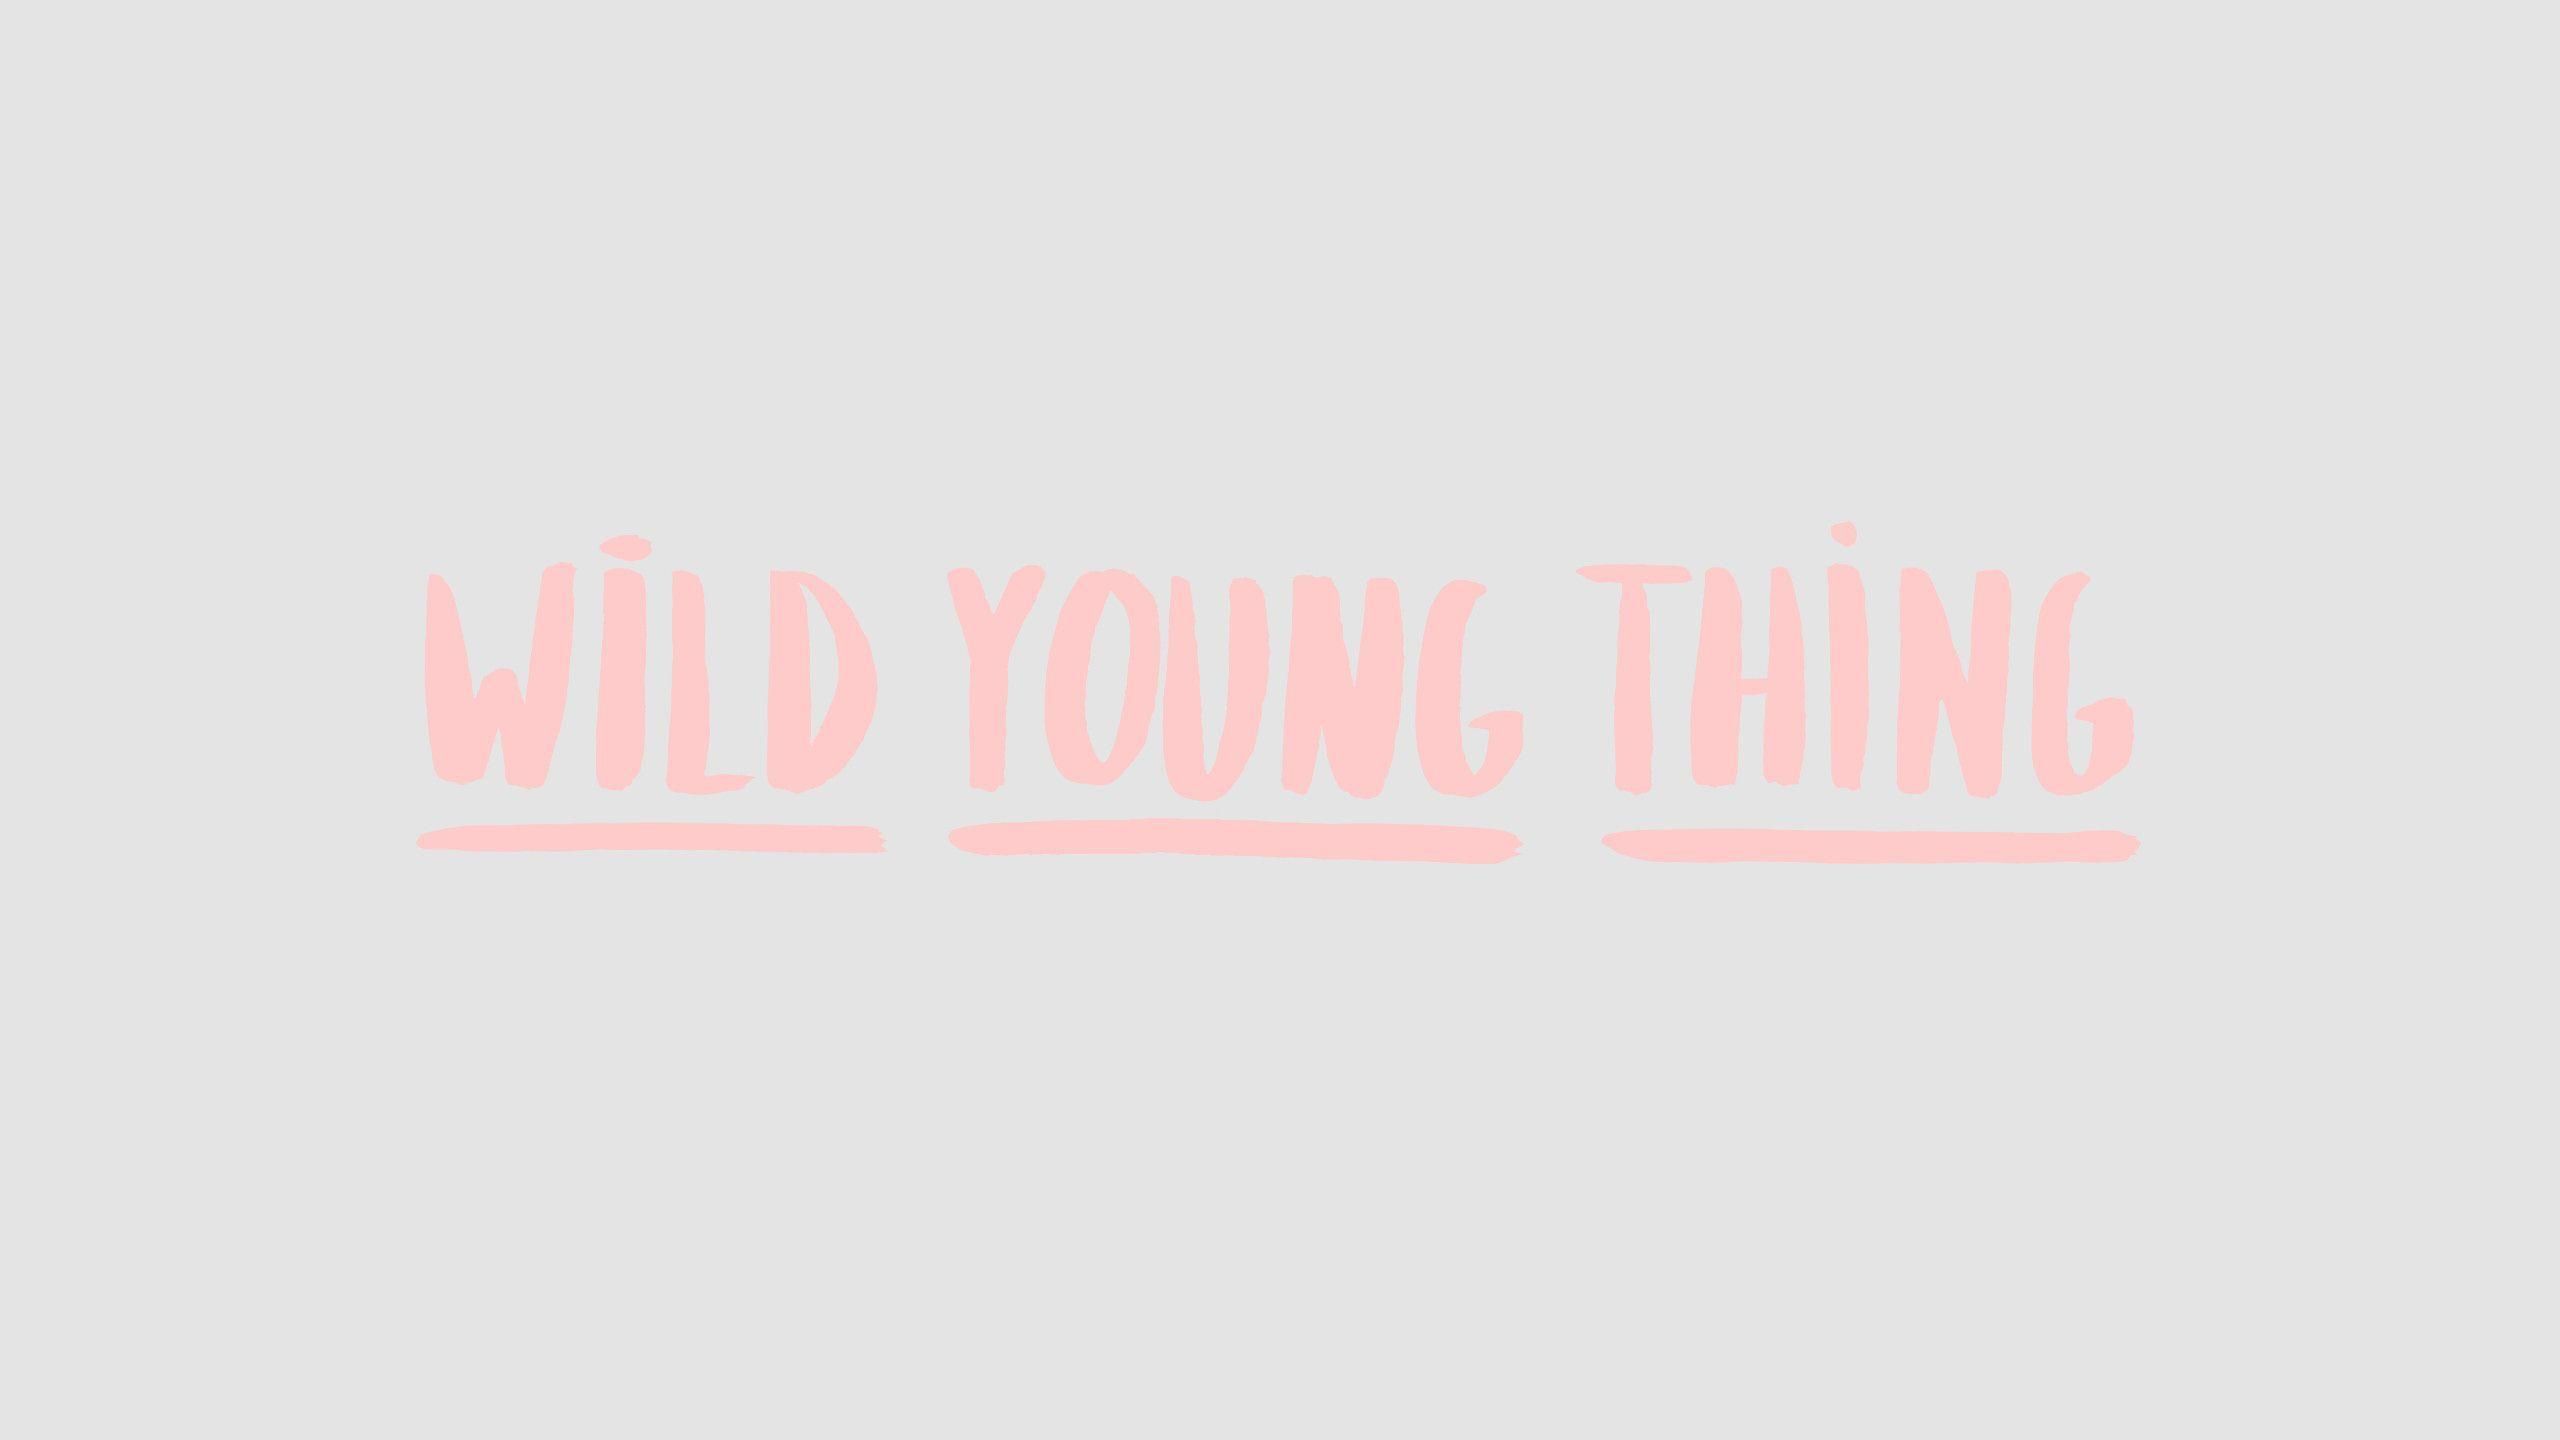 Wild young thing pink text on a white background - Pastel minimalist